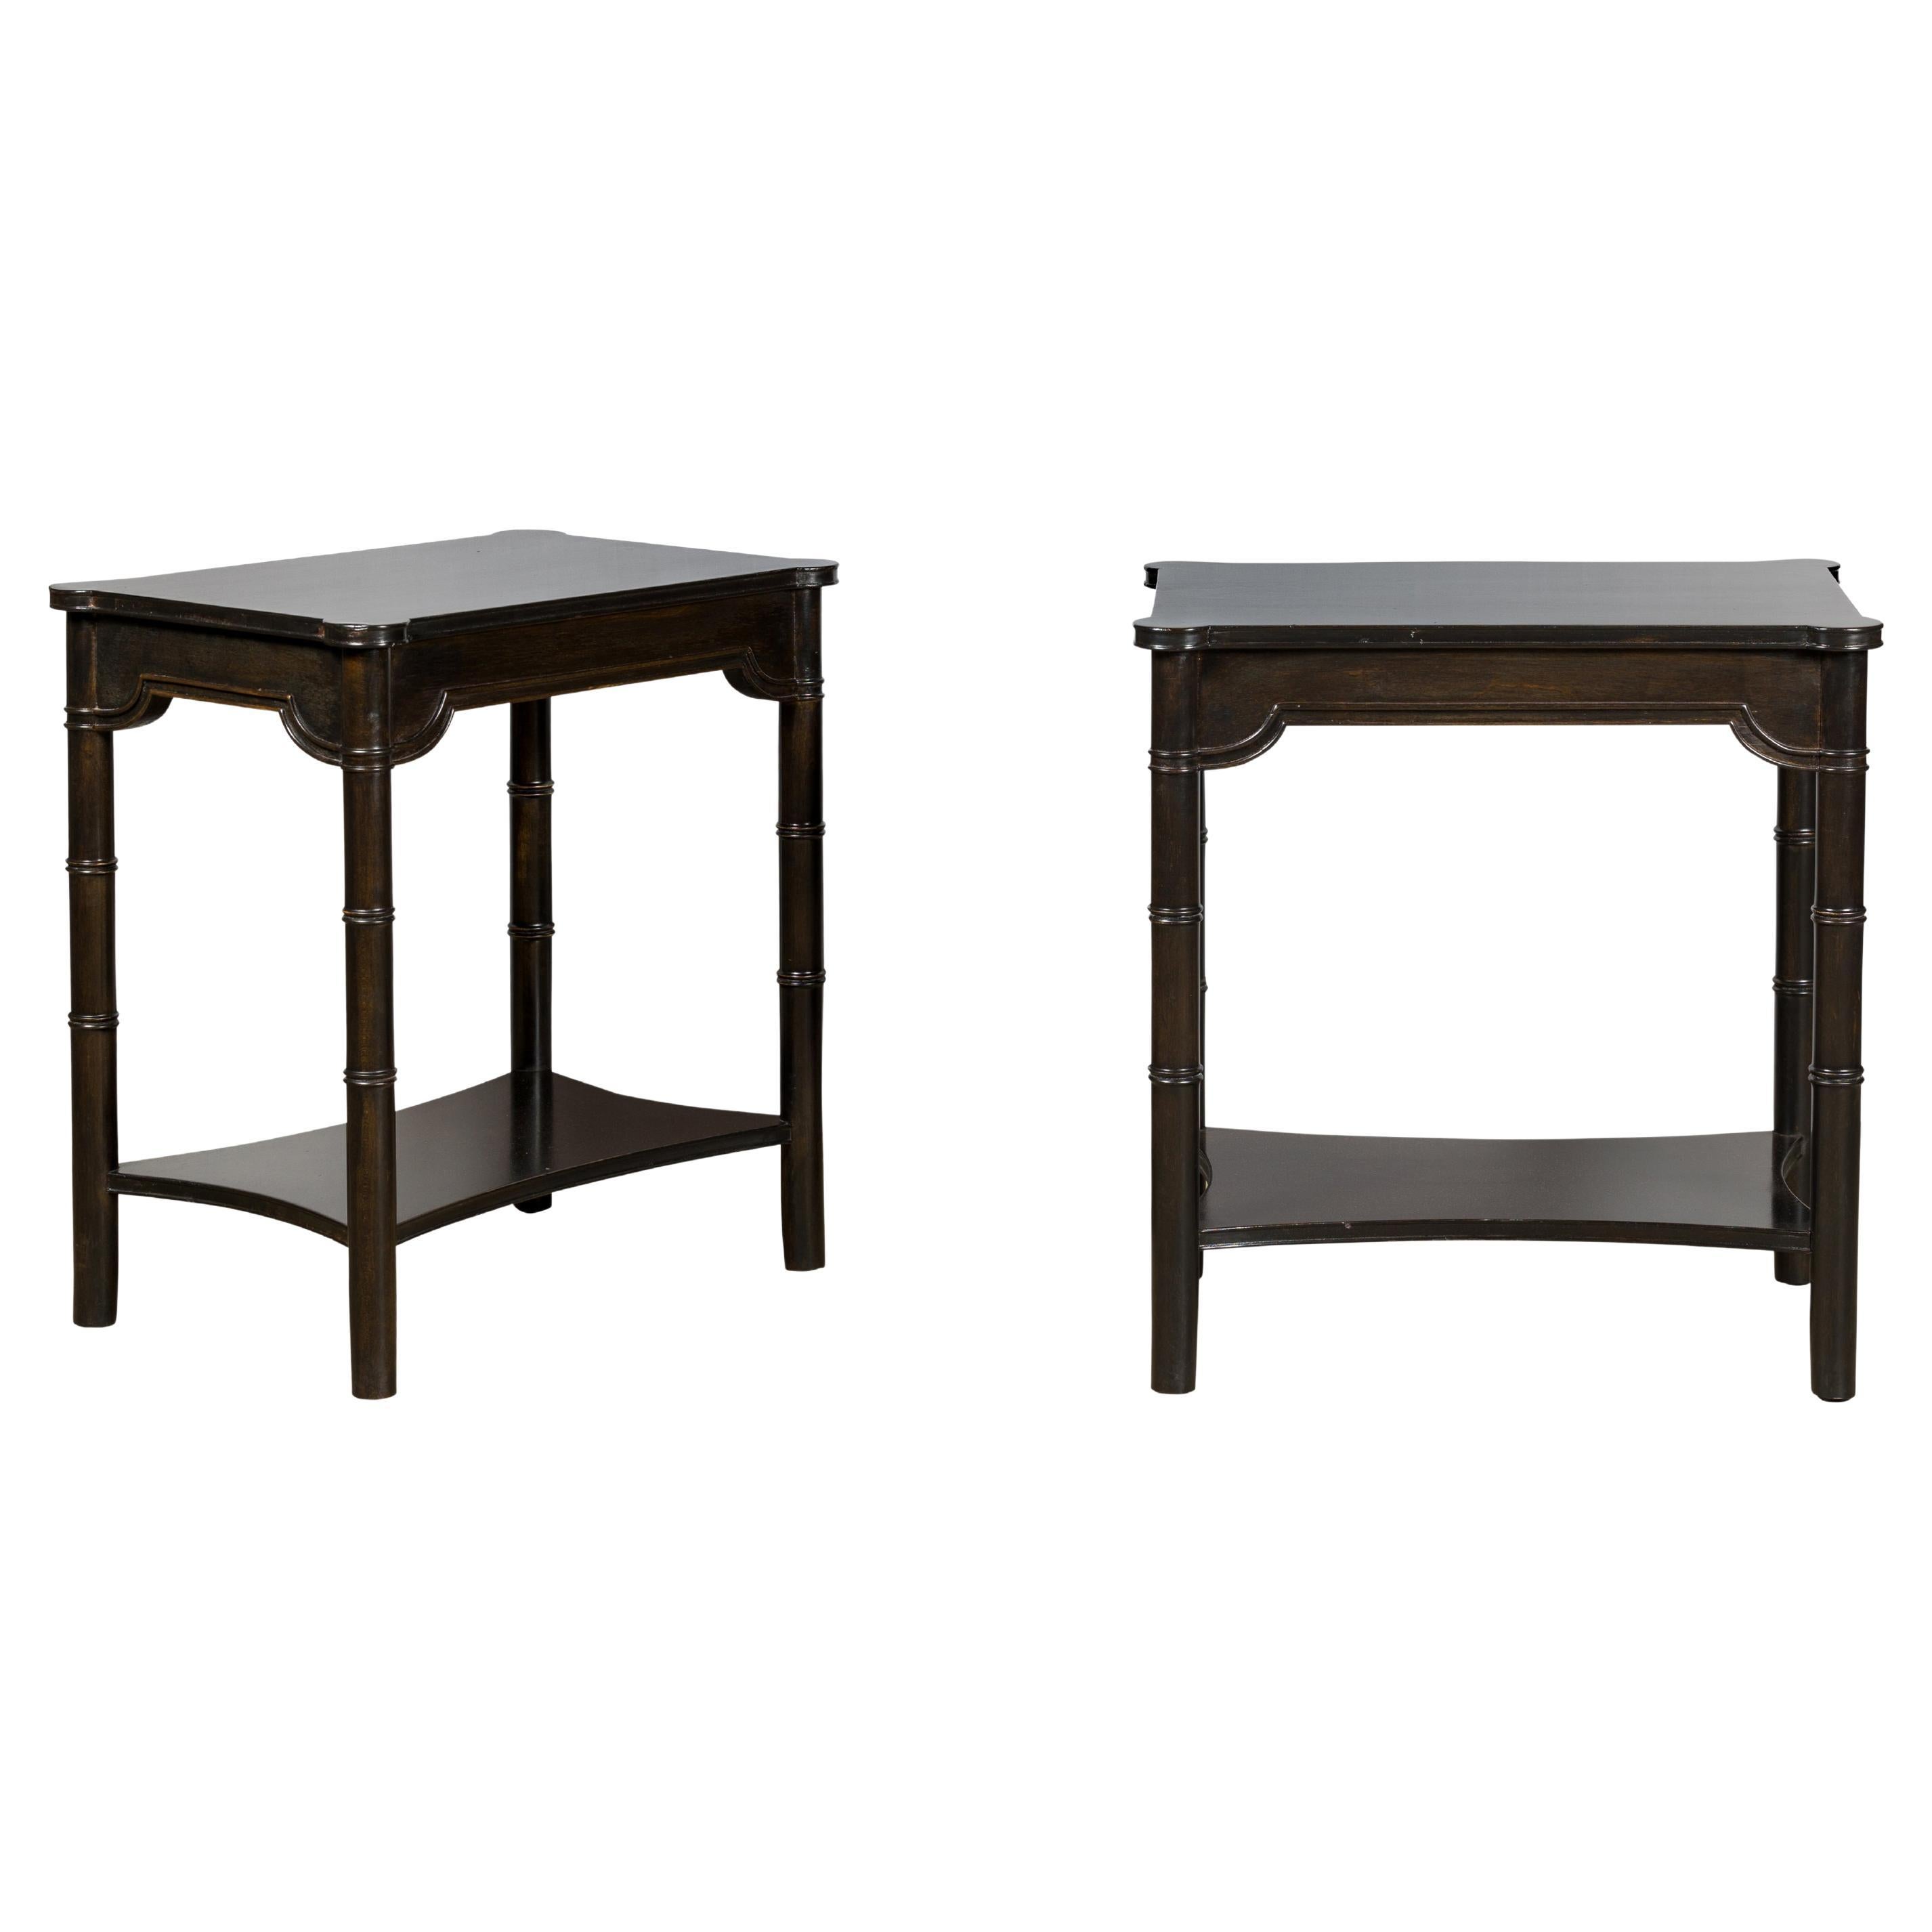 Midcentury English Ebonized Faux Bamboo Side Tables with Carved Aprons, a Pair